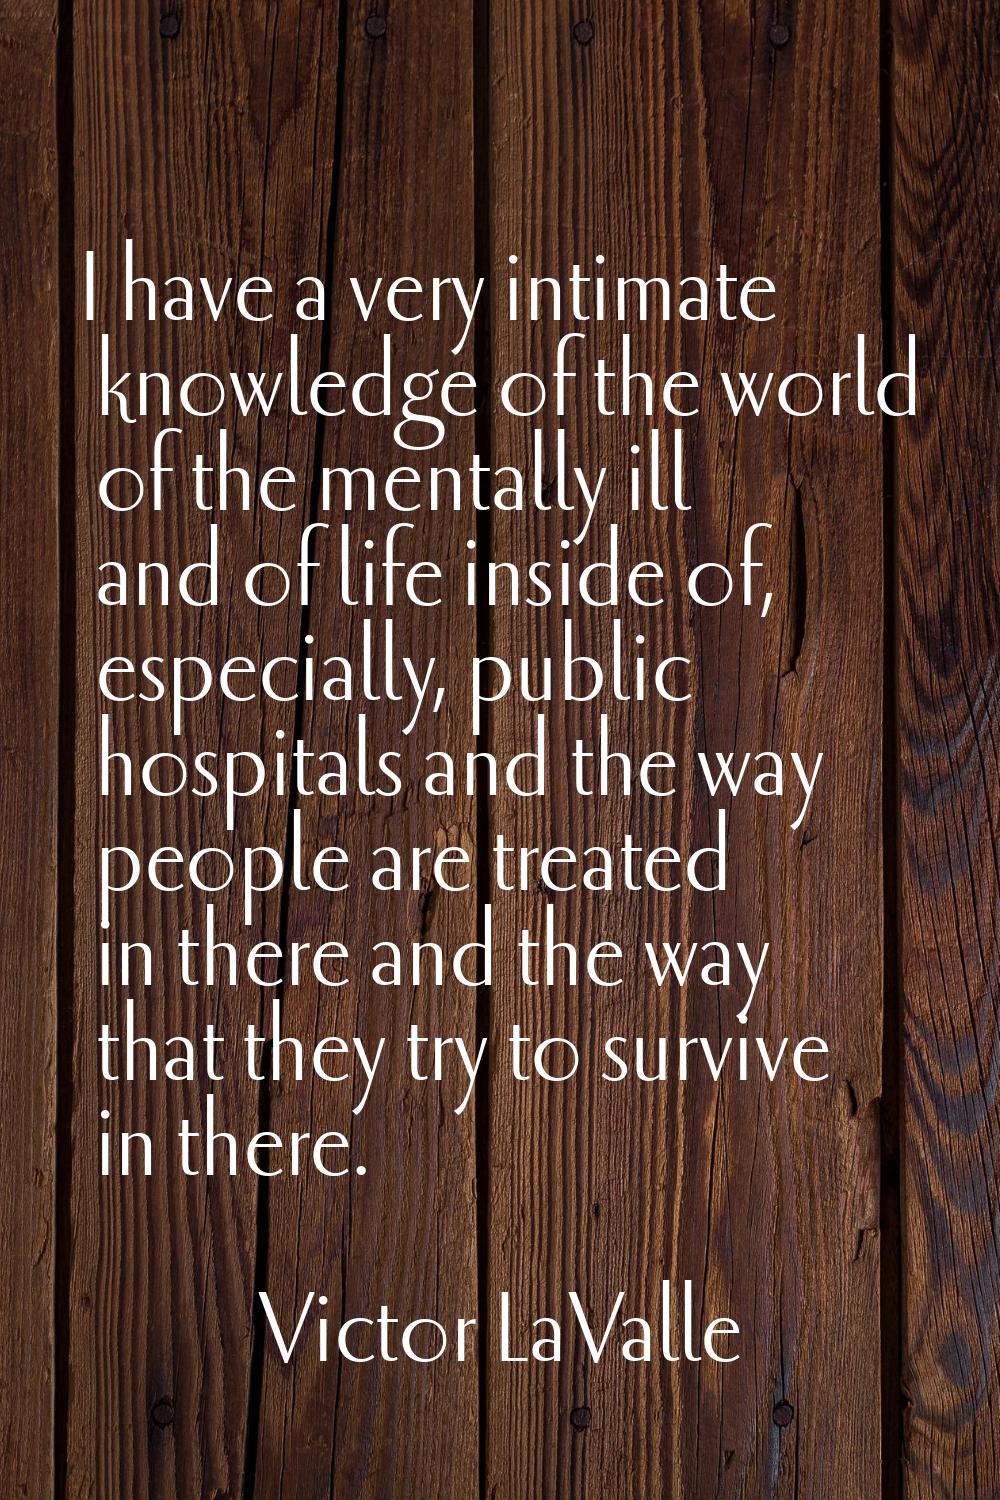 I have a very intimate knowledge of the world of the mentally ill and of life inside of, especially